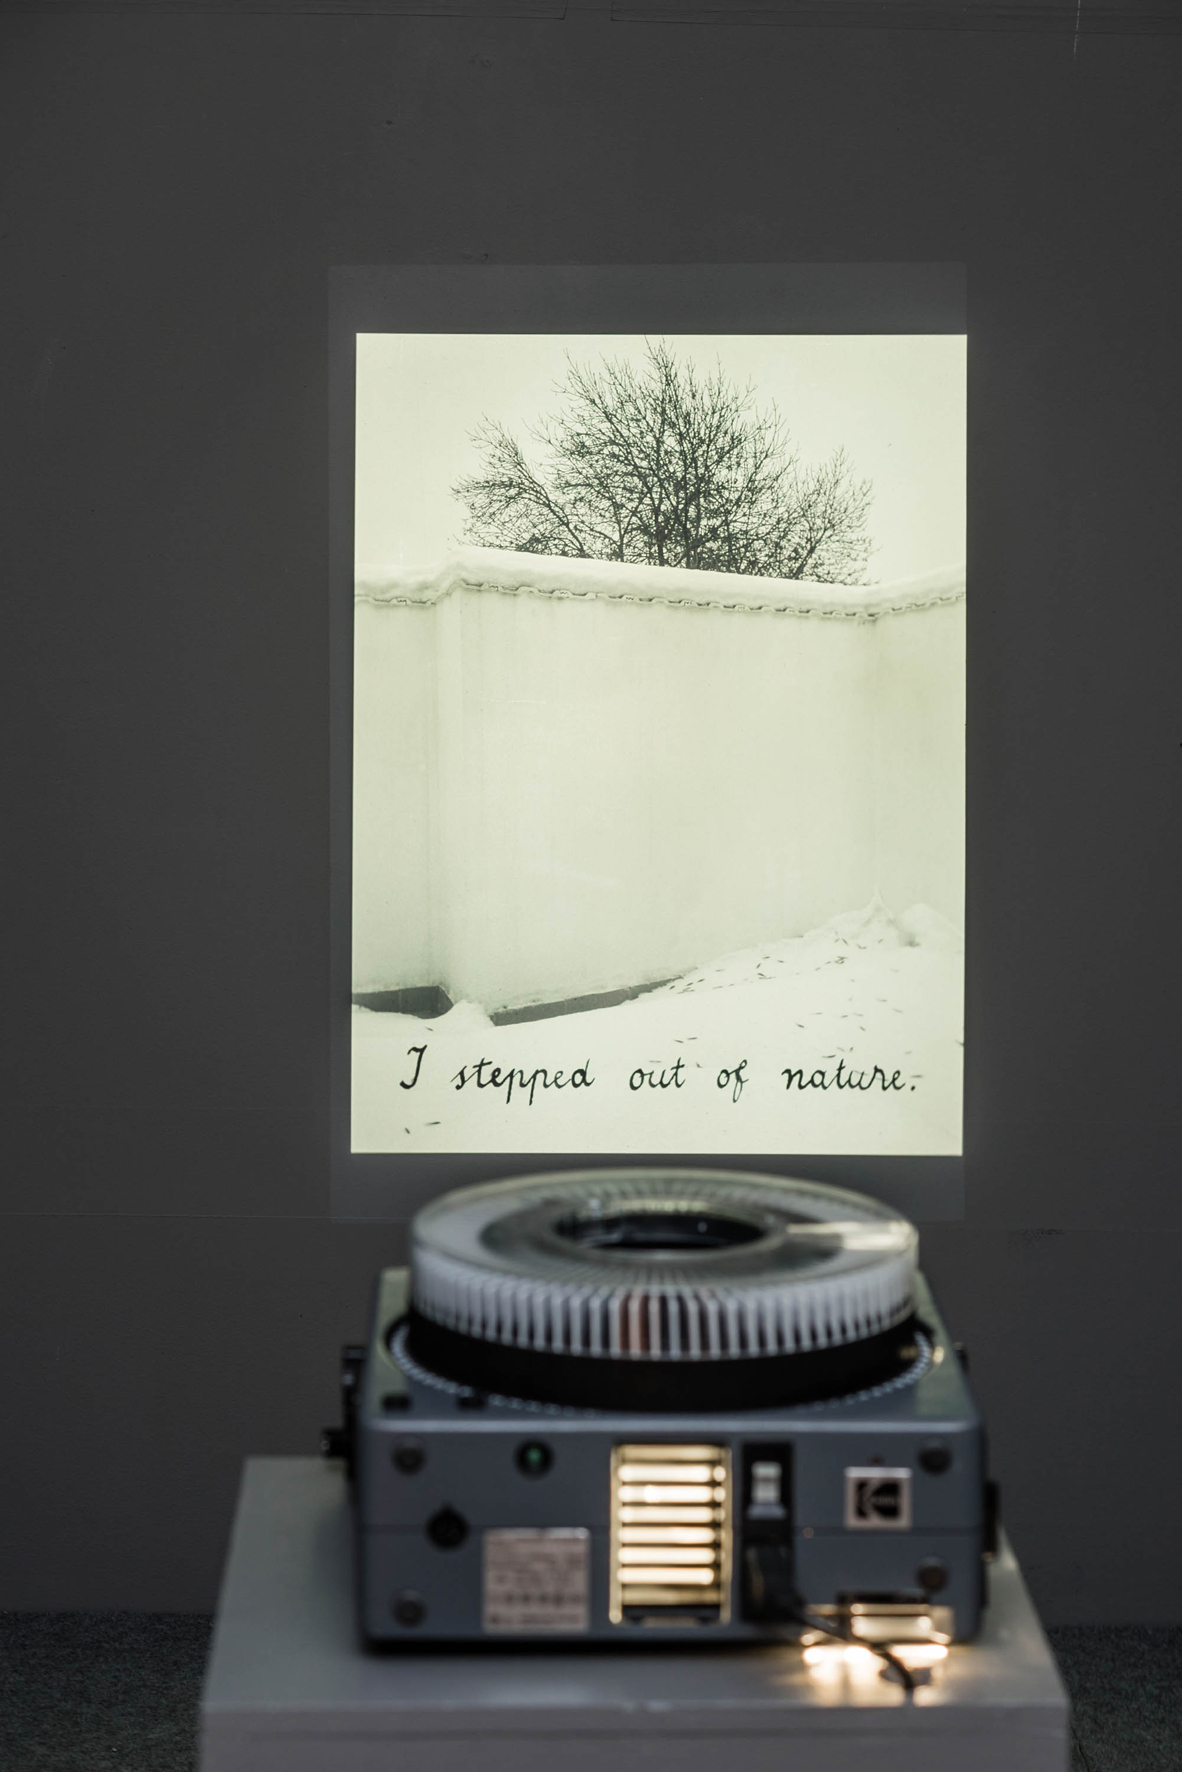 I ALWAYS WANTED TO BE AT THE CENTER (after Peter Handke) (2015) Slide projection, Exhibition view Image copyright: Jean Baptiste Béranger, courtesy of the Romanian Cultural Institute